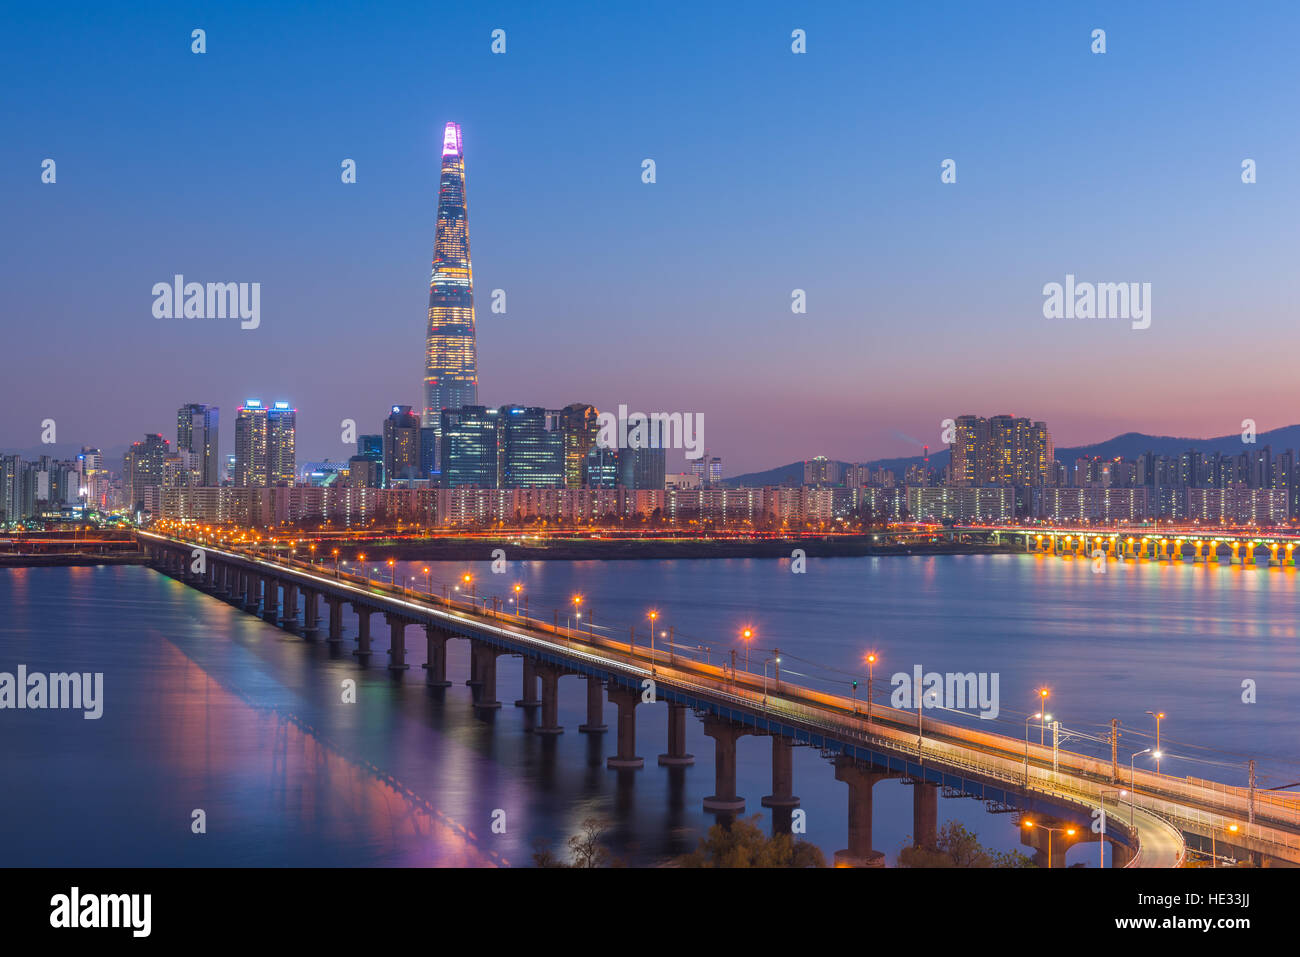 Seoul Subway and Lotte Tower at Night, South korea Stock Photo